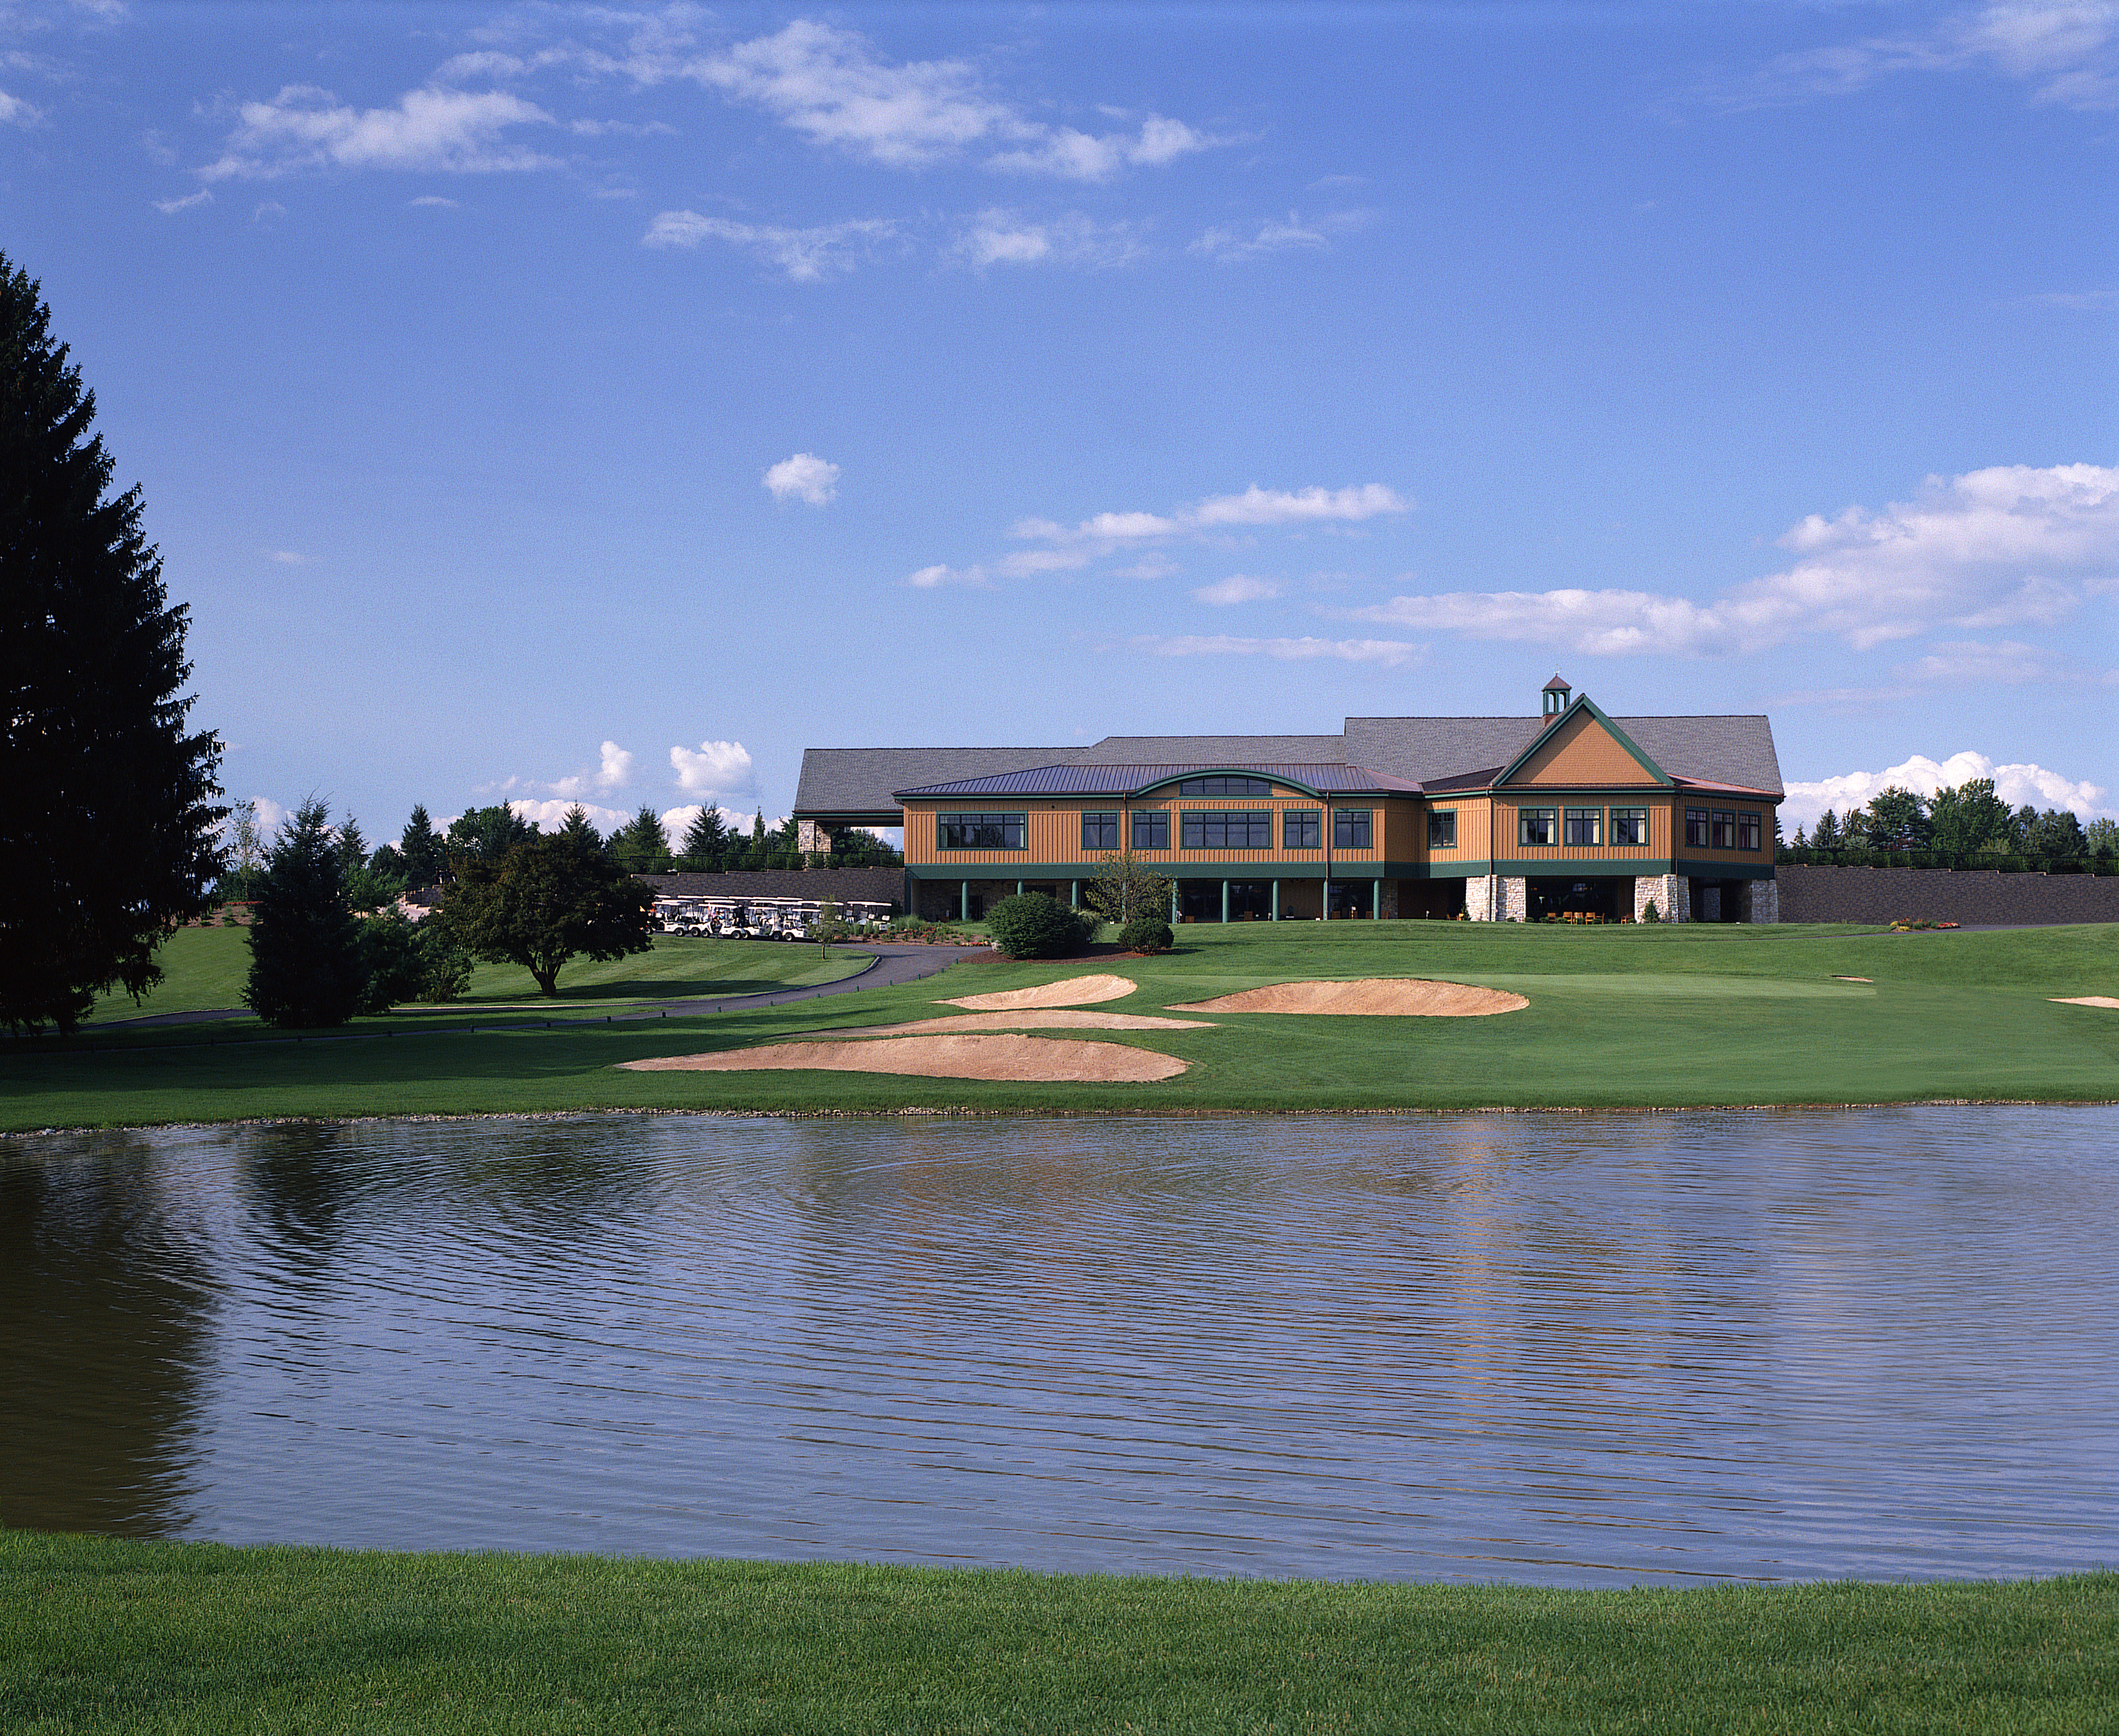 The Clubhouse at the Hershey Country Club is a great place to relax, unwind and have a great dinner after a round of golf! #SweetestMoms